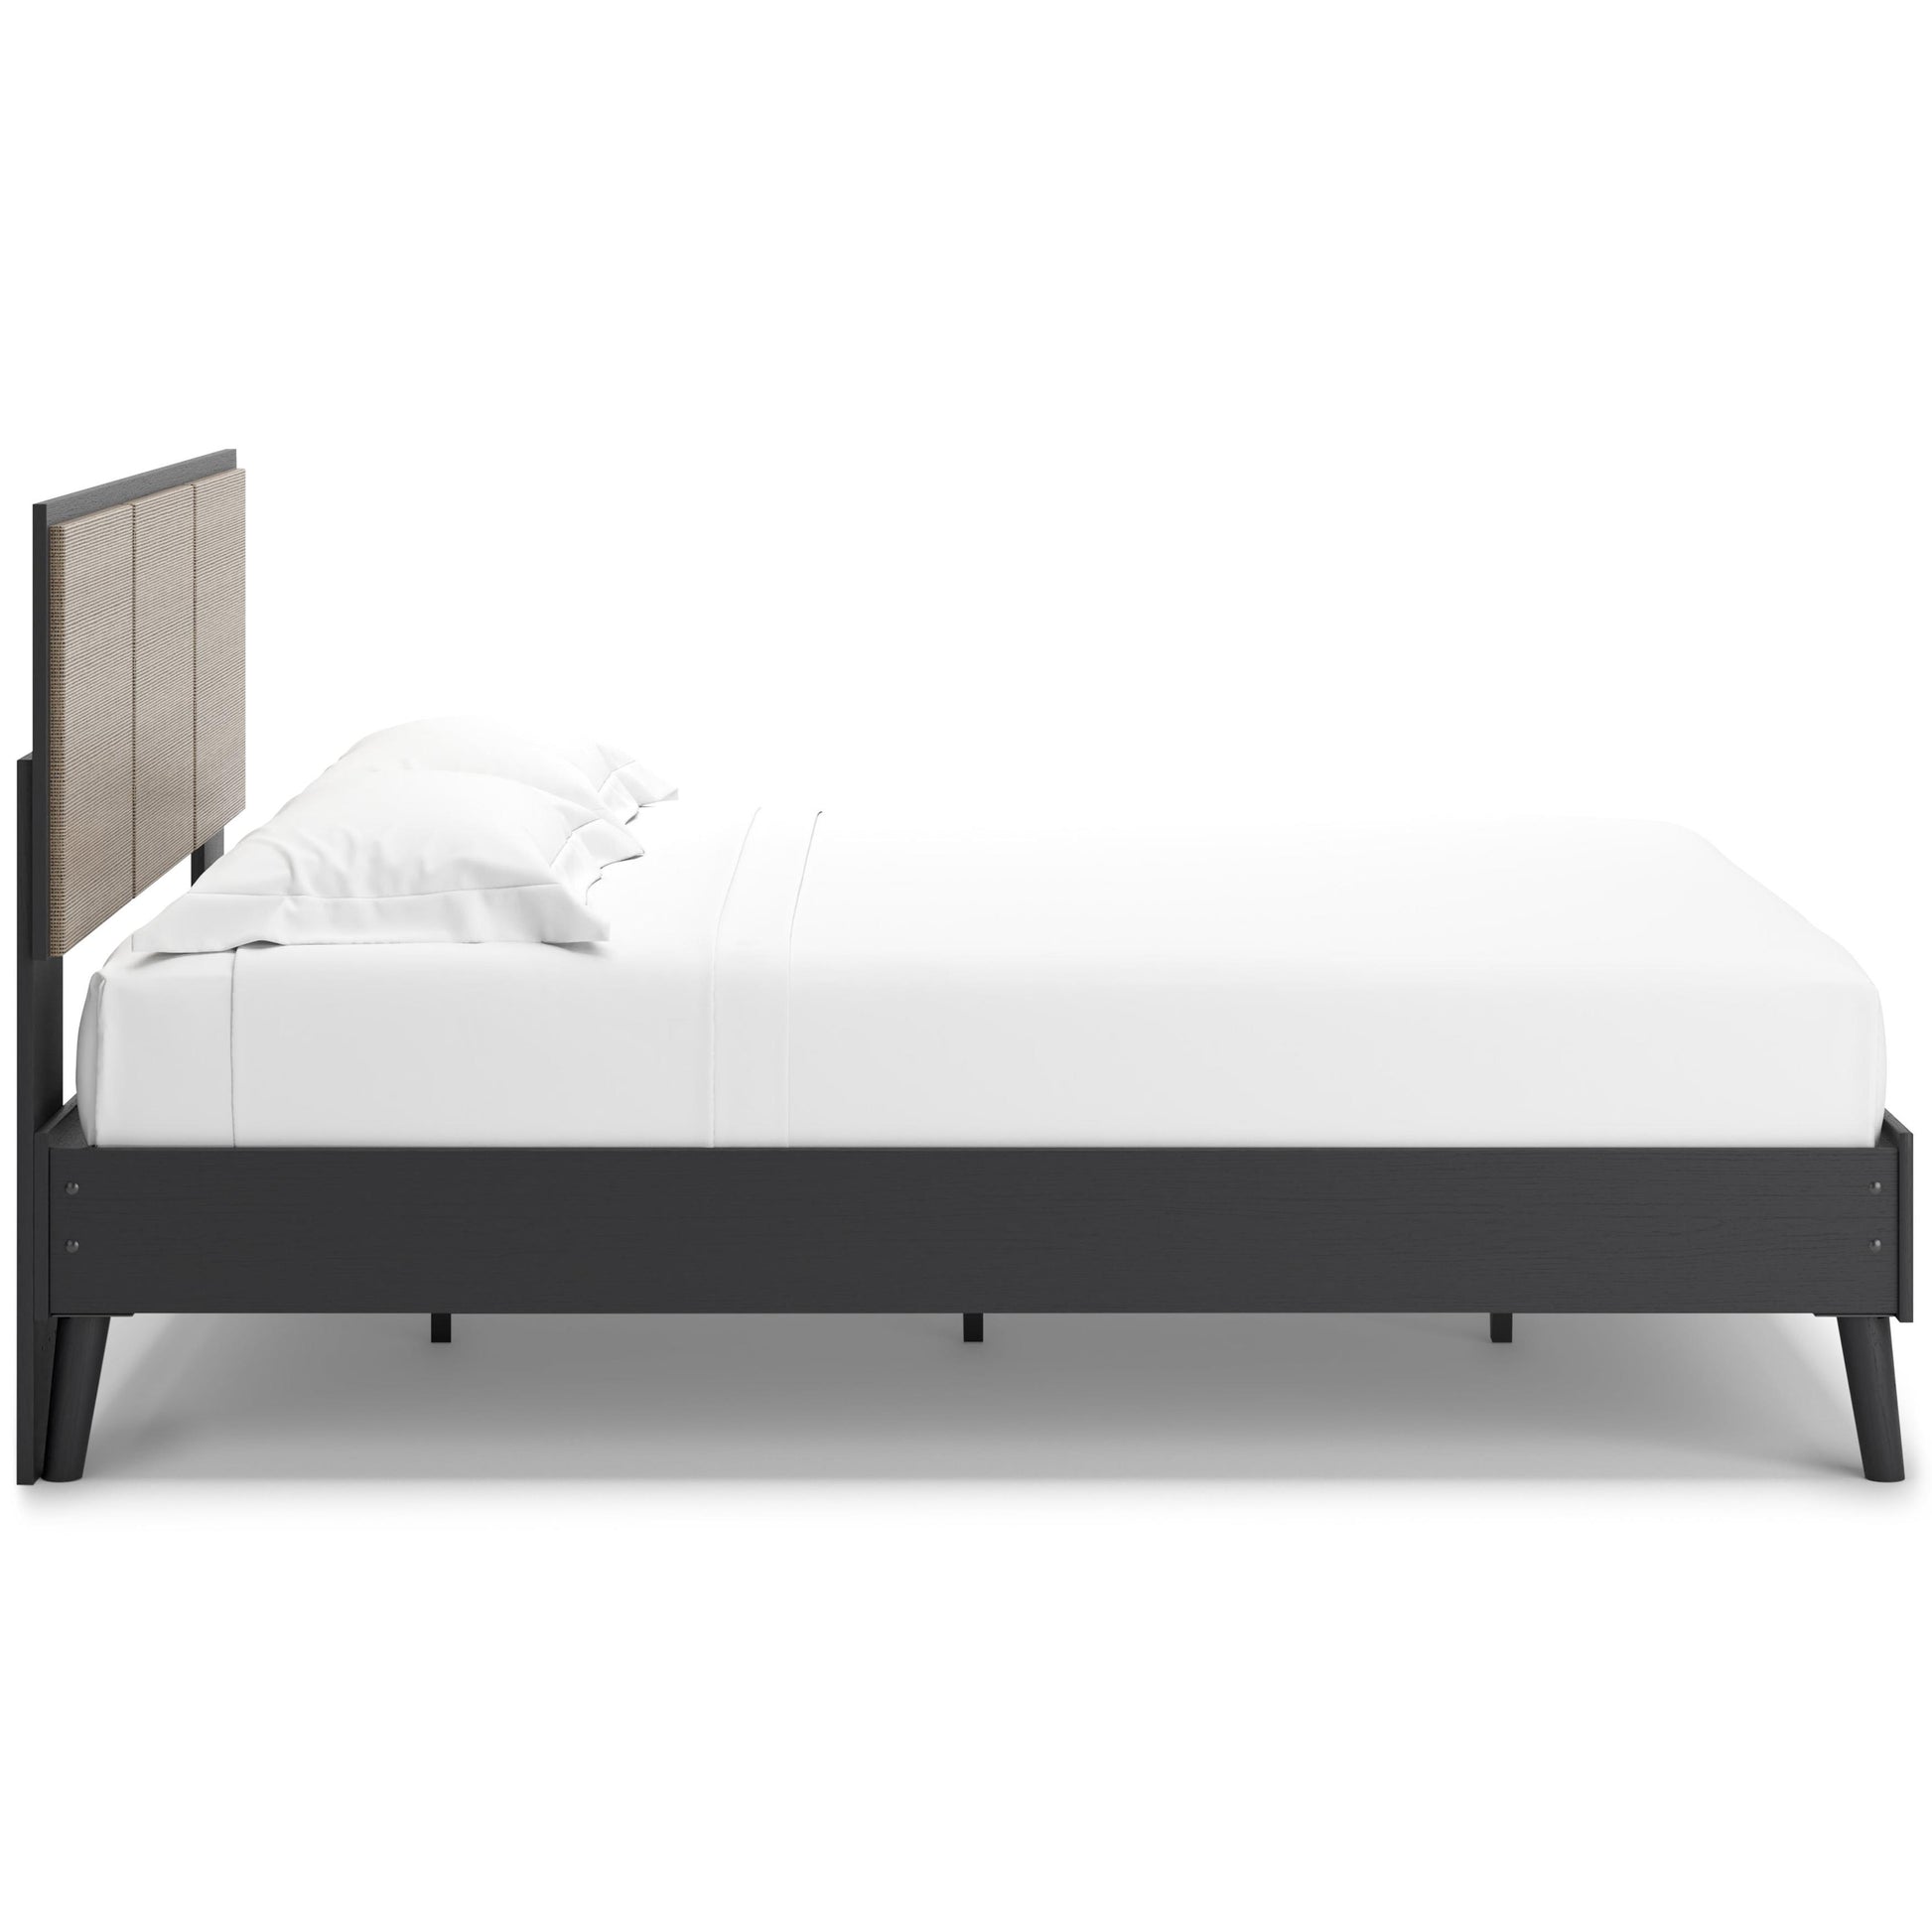 Signature Design by Ashley Charlang Queen Panel Bed EB1198-157/EB1198-113 IMAGE 3